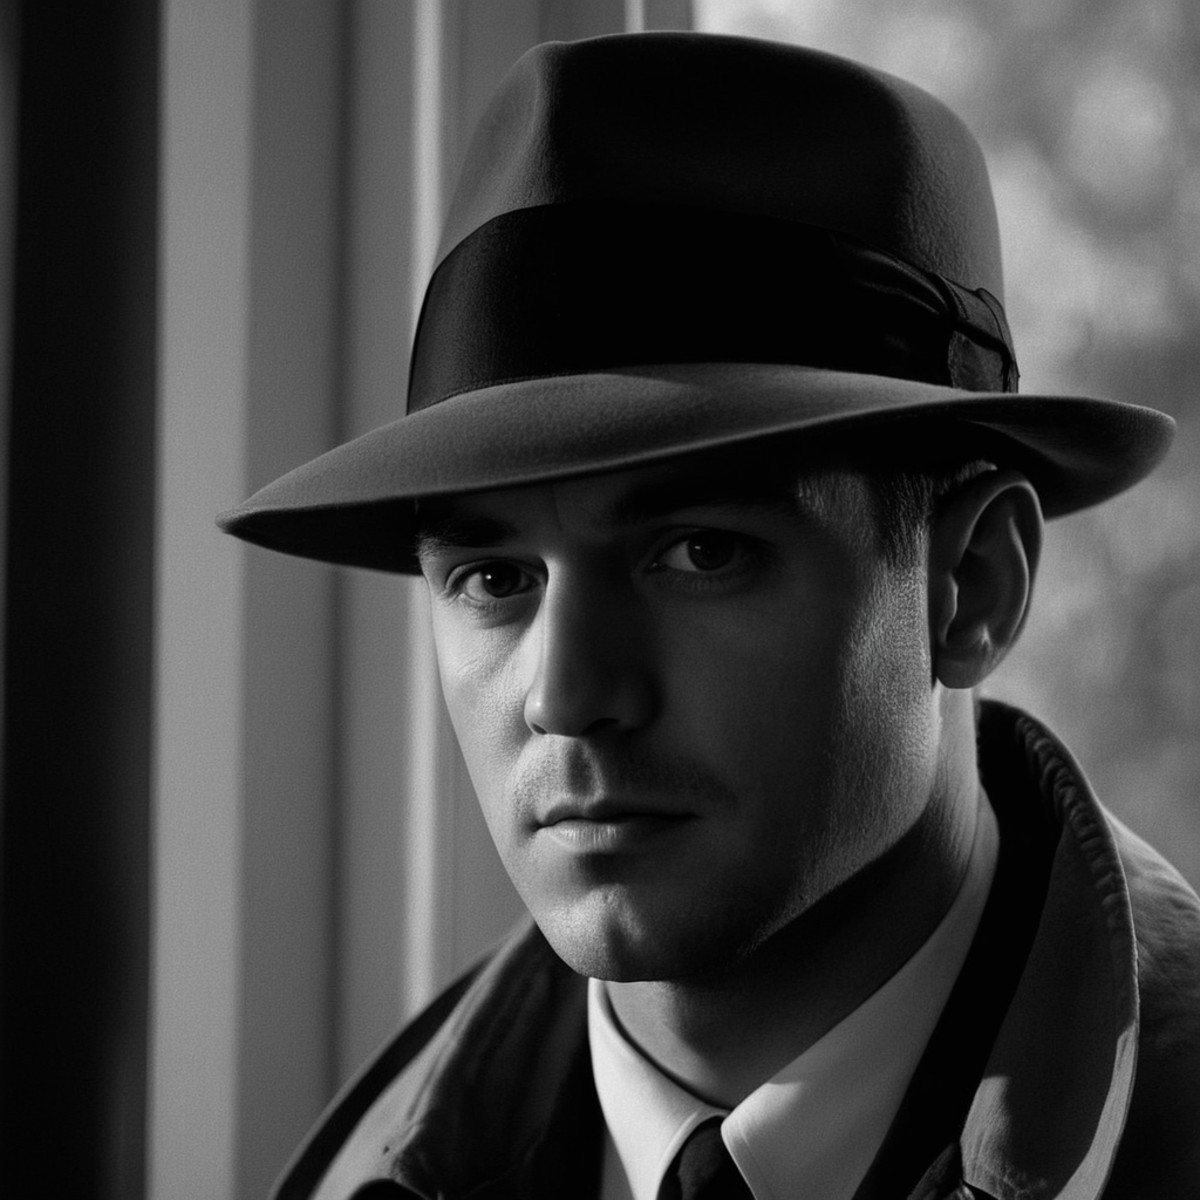 cinematic film still of classic film noir style <lora:Classic Film Noir style:1> 
a man in a hat and trench coat holding a...